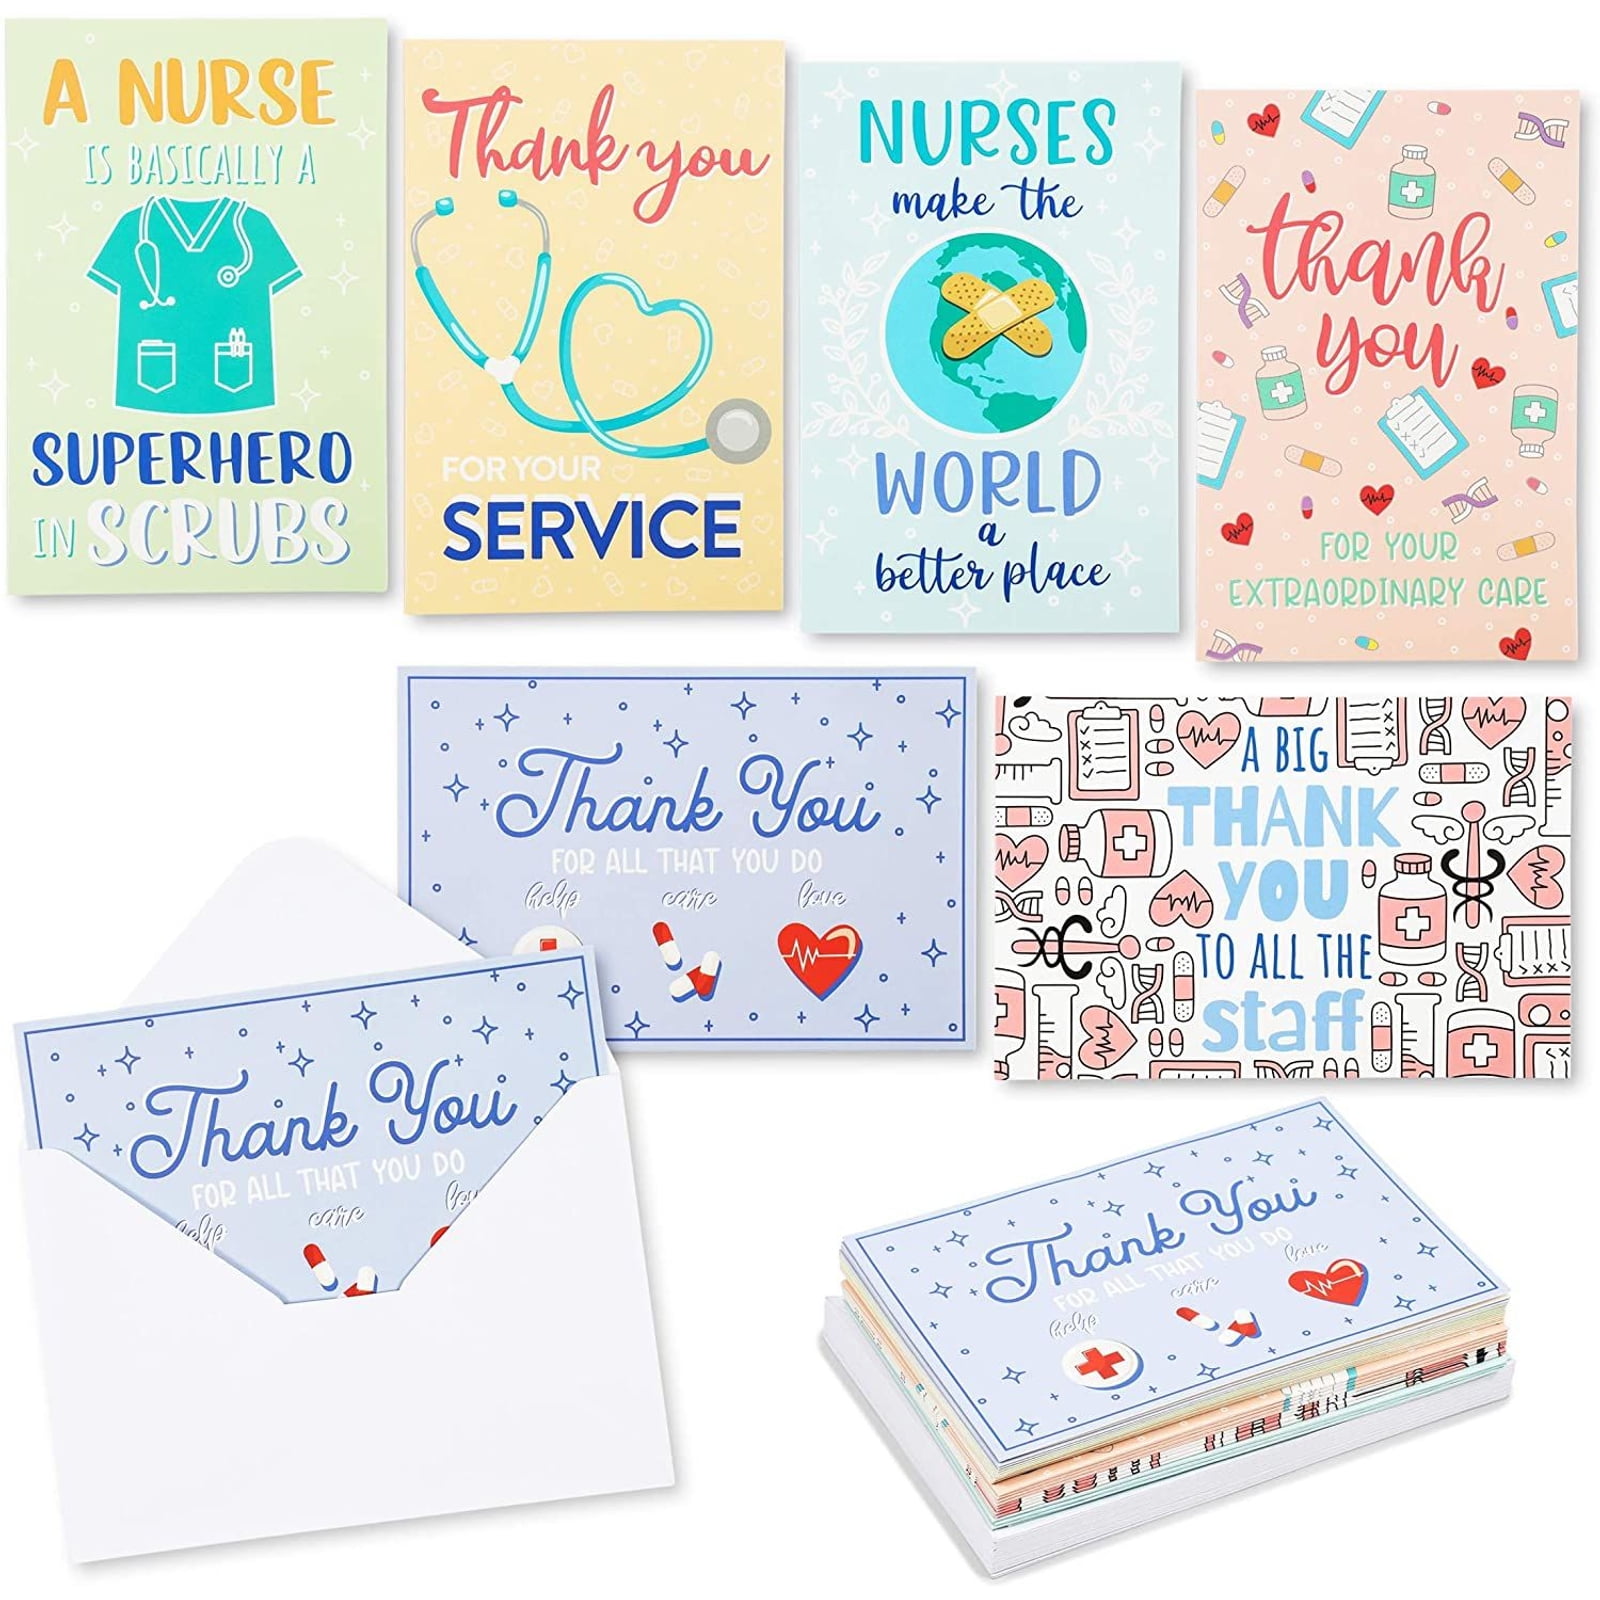 Thank You Gift Showing Appreciation of Nurse Showing Kindness Key Ring Gift Card 